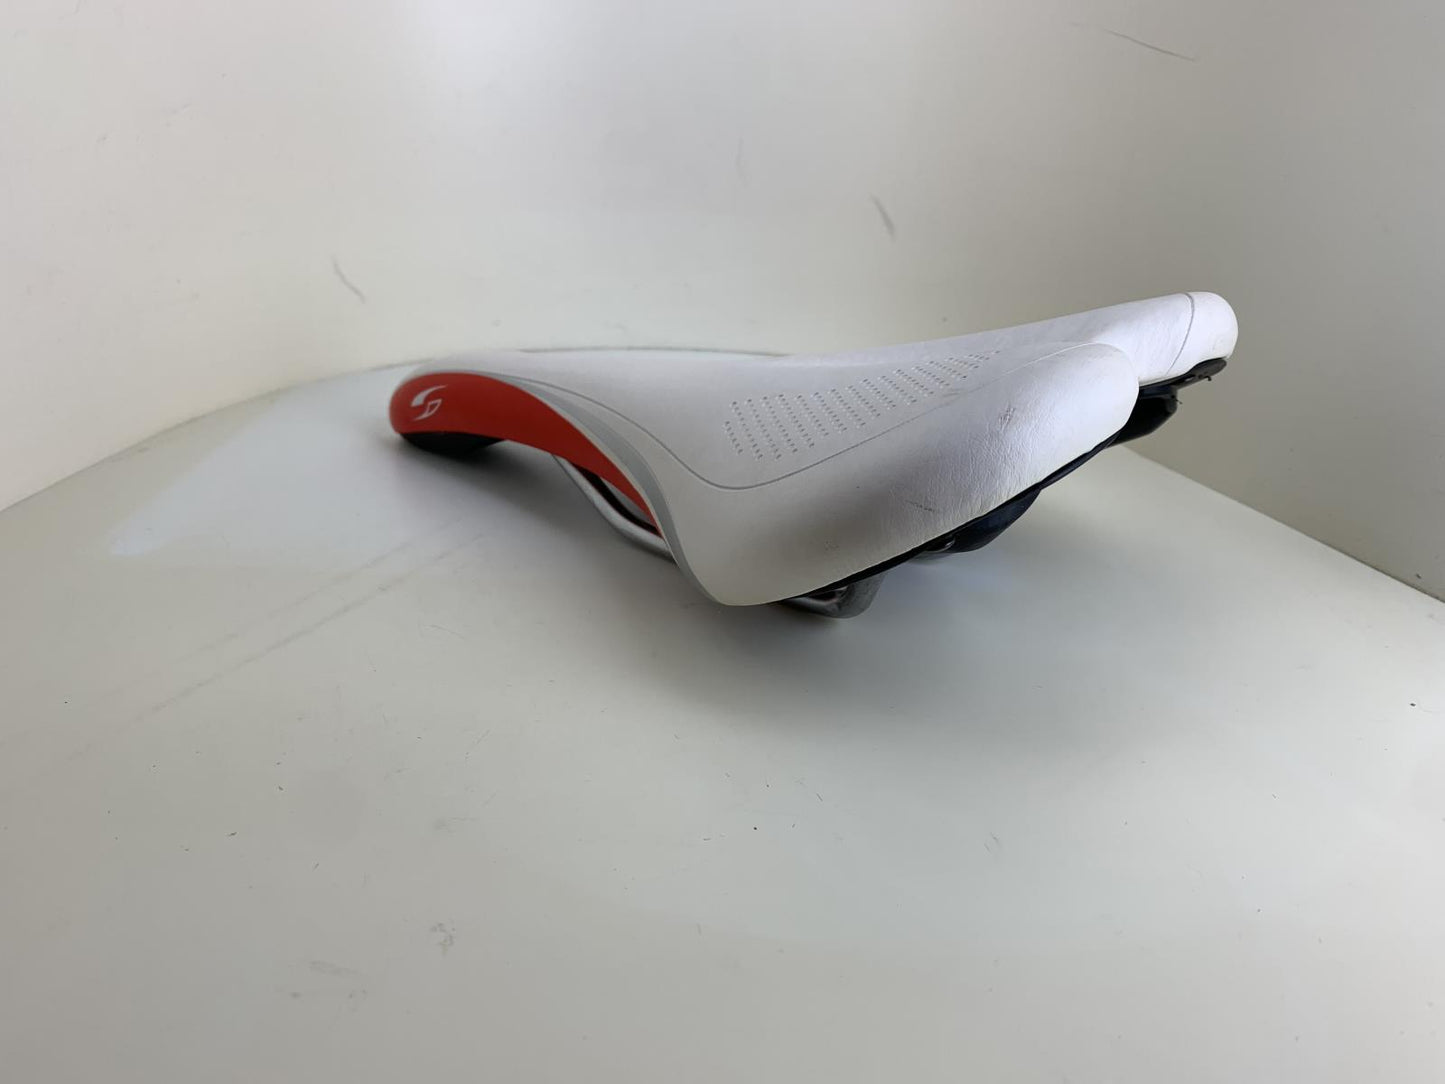 Sundeal Bike Cycle Saddle Seat White RED New Take Off BLEM